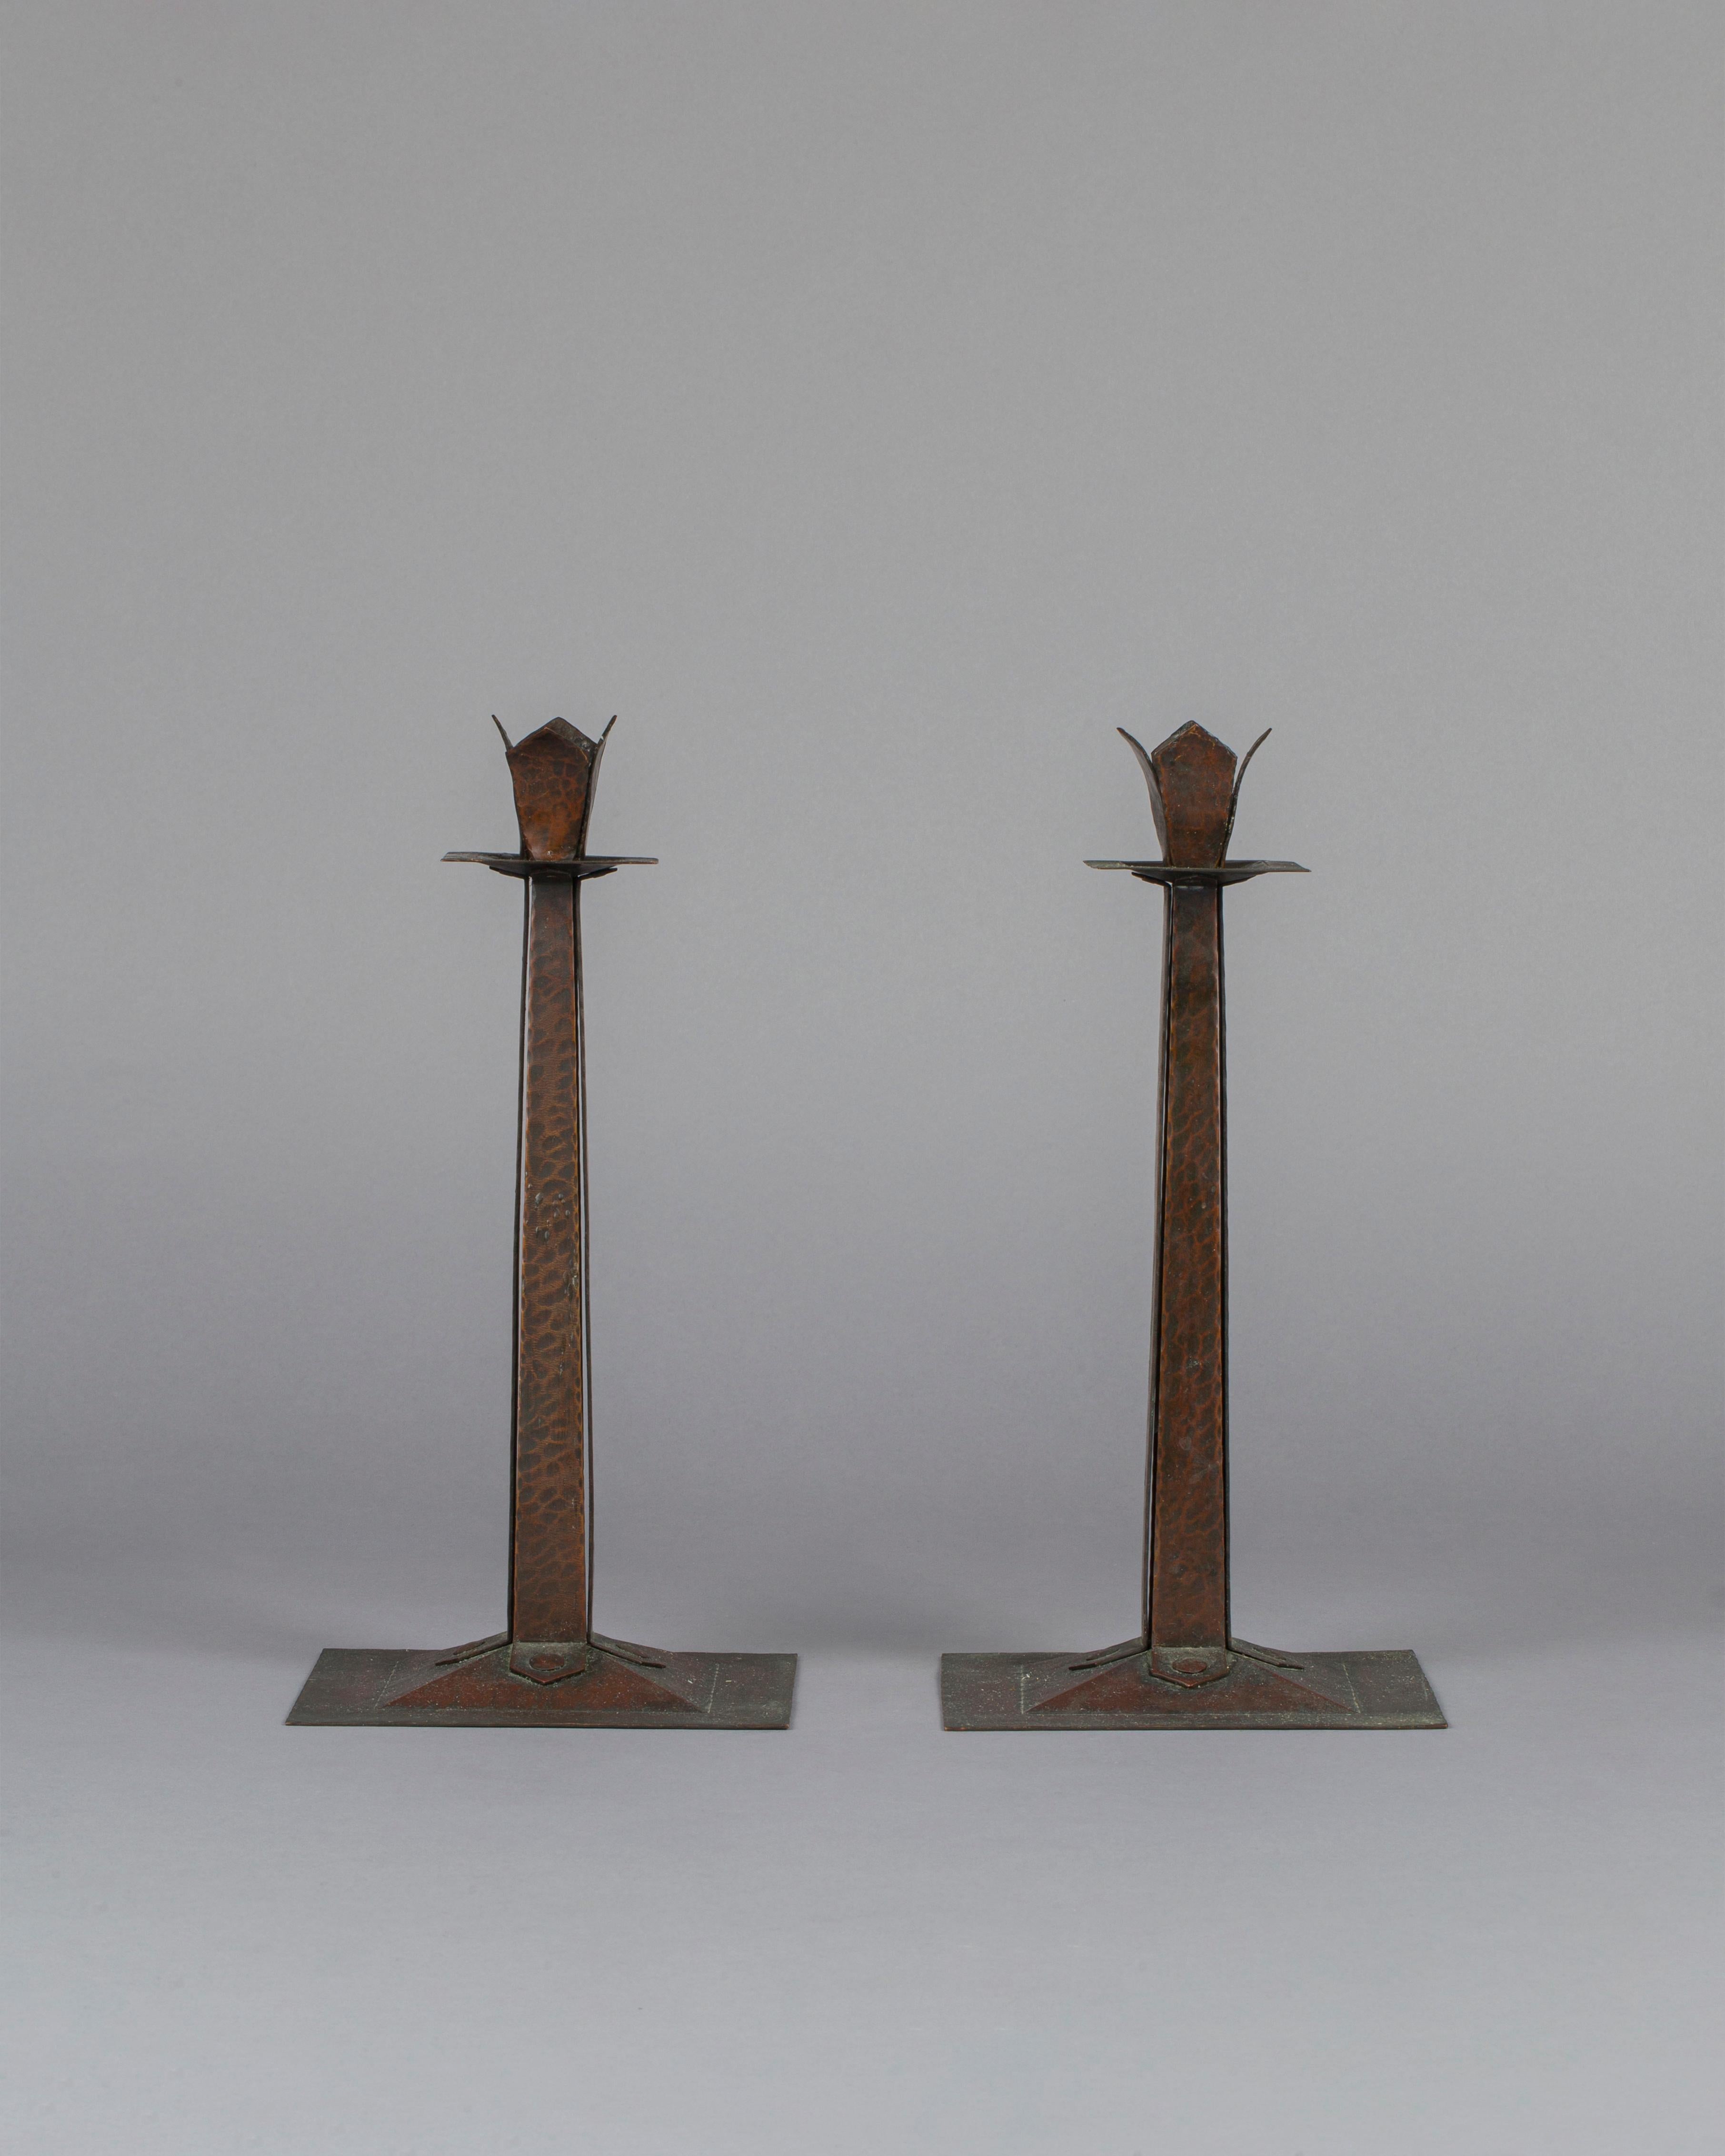 Gustav Stickley
design attributed to Victor Toothaker
Set of Four Candlesticks, circa. 1905
Model No. 70
Hand-wrought copper
hand-wrought copper
each impressed with firm's mark
executed by the Craftsman Workshops of Gustav Stickley, Eastwood,